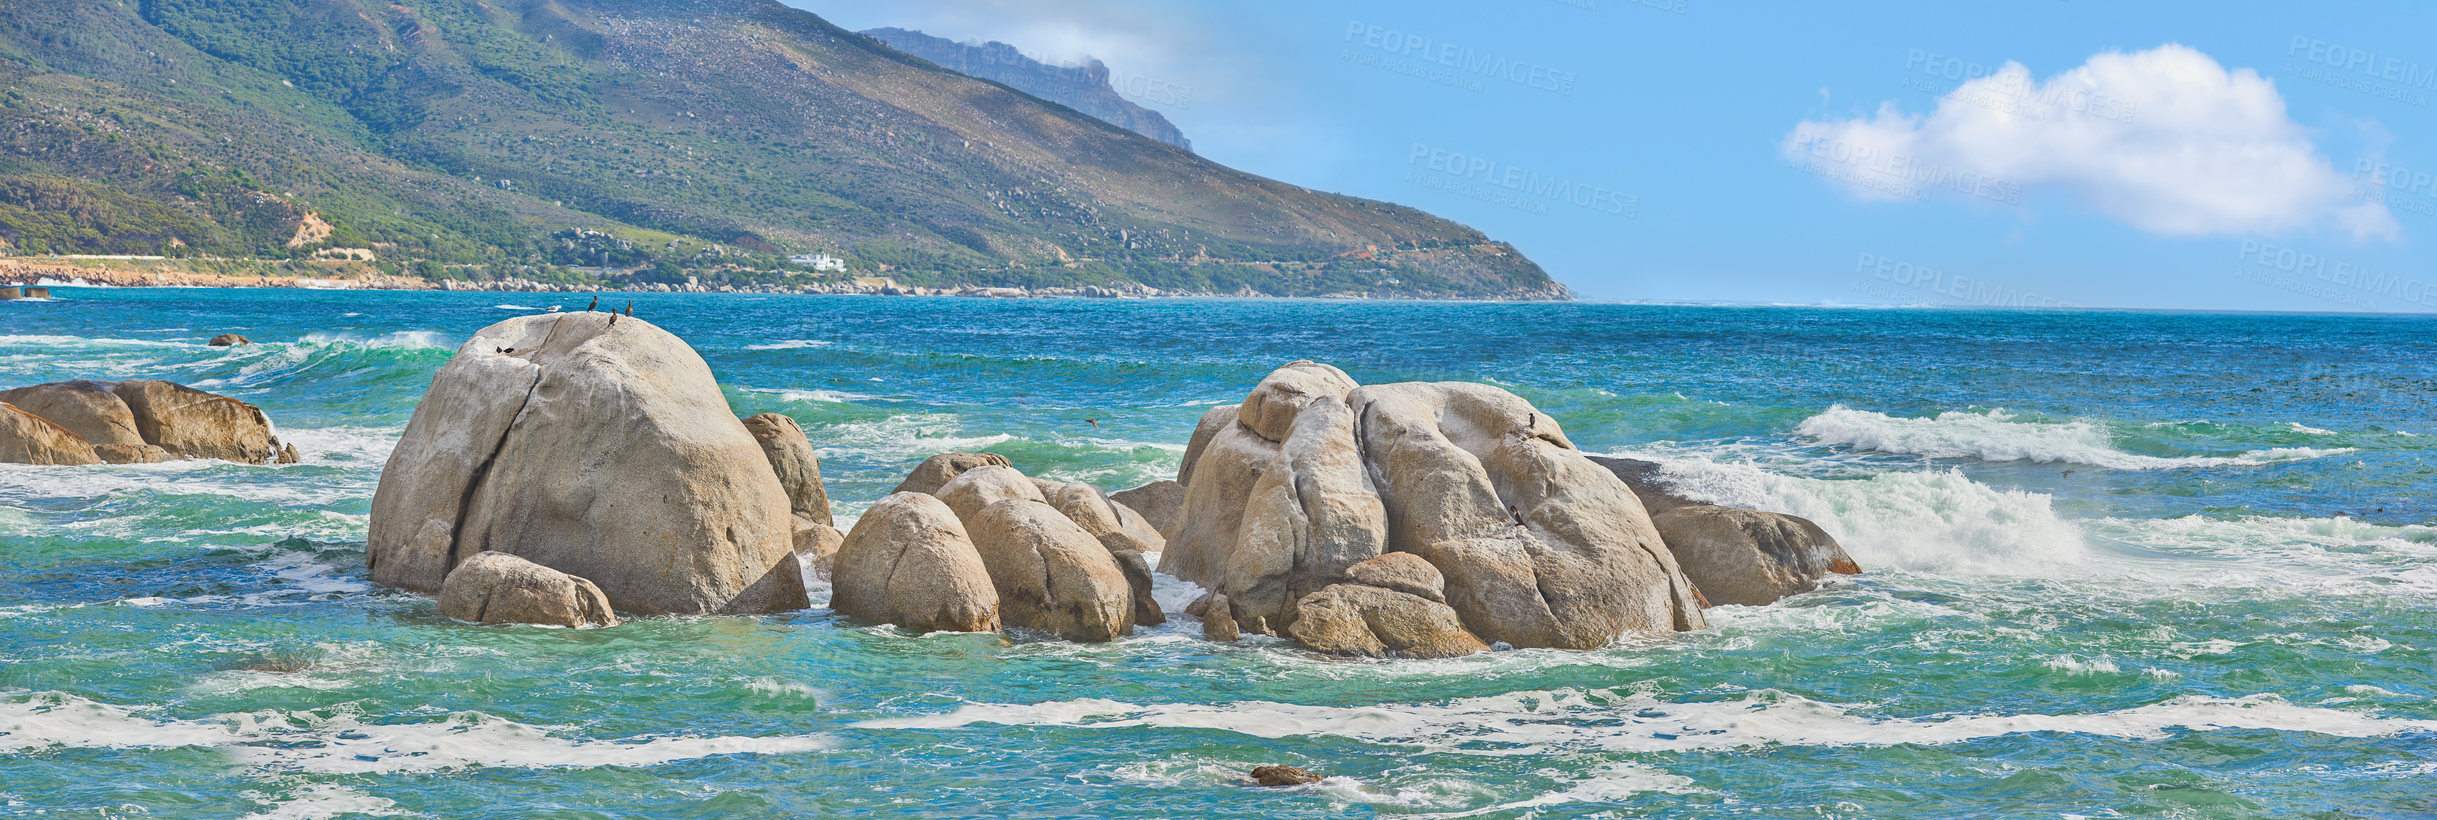 Buy stock photo Ocean seascape of  Camps Bay beach, Table Mountain National Park, Cape Town, South Africa. Calm scenic sea landscape with rocks and waves on a blue horizon. Stunning turquoise water by a coastline 